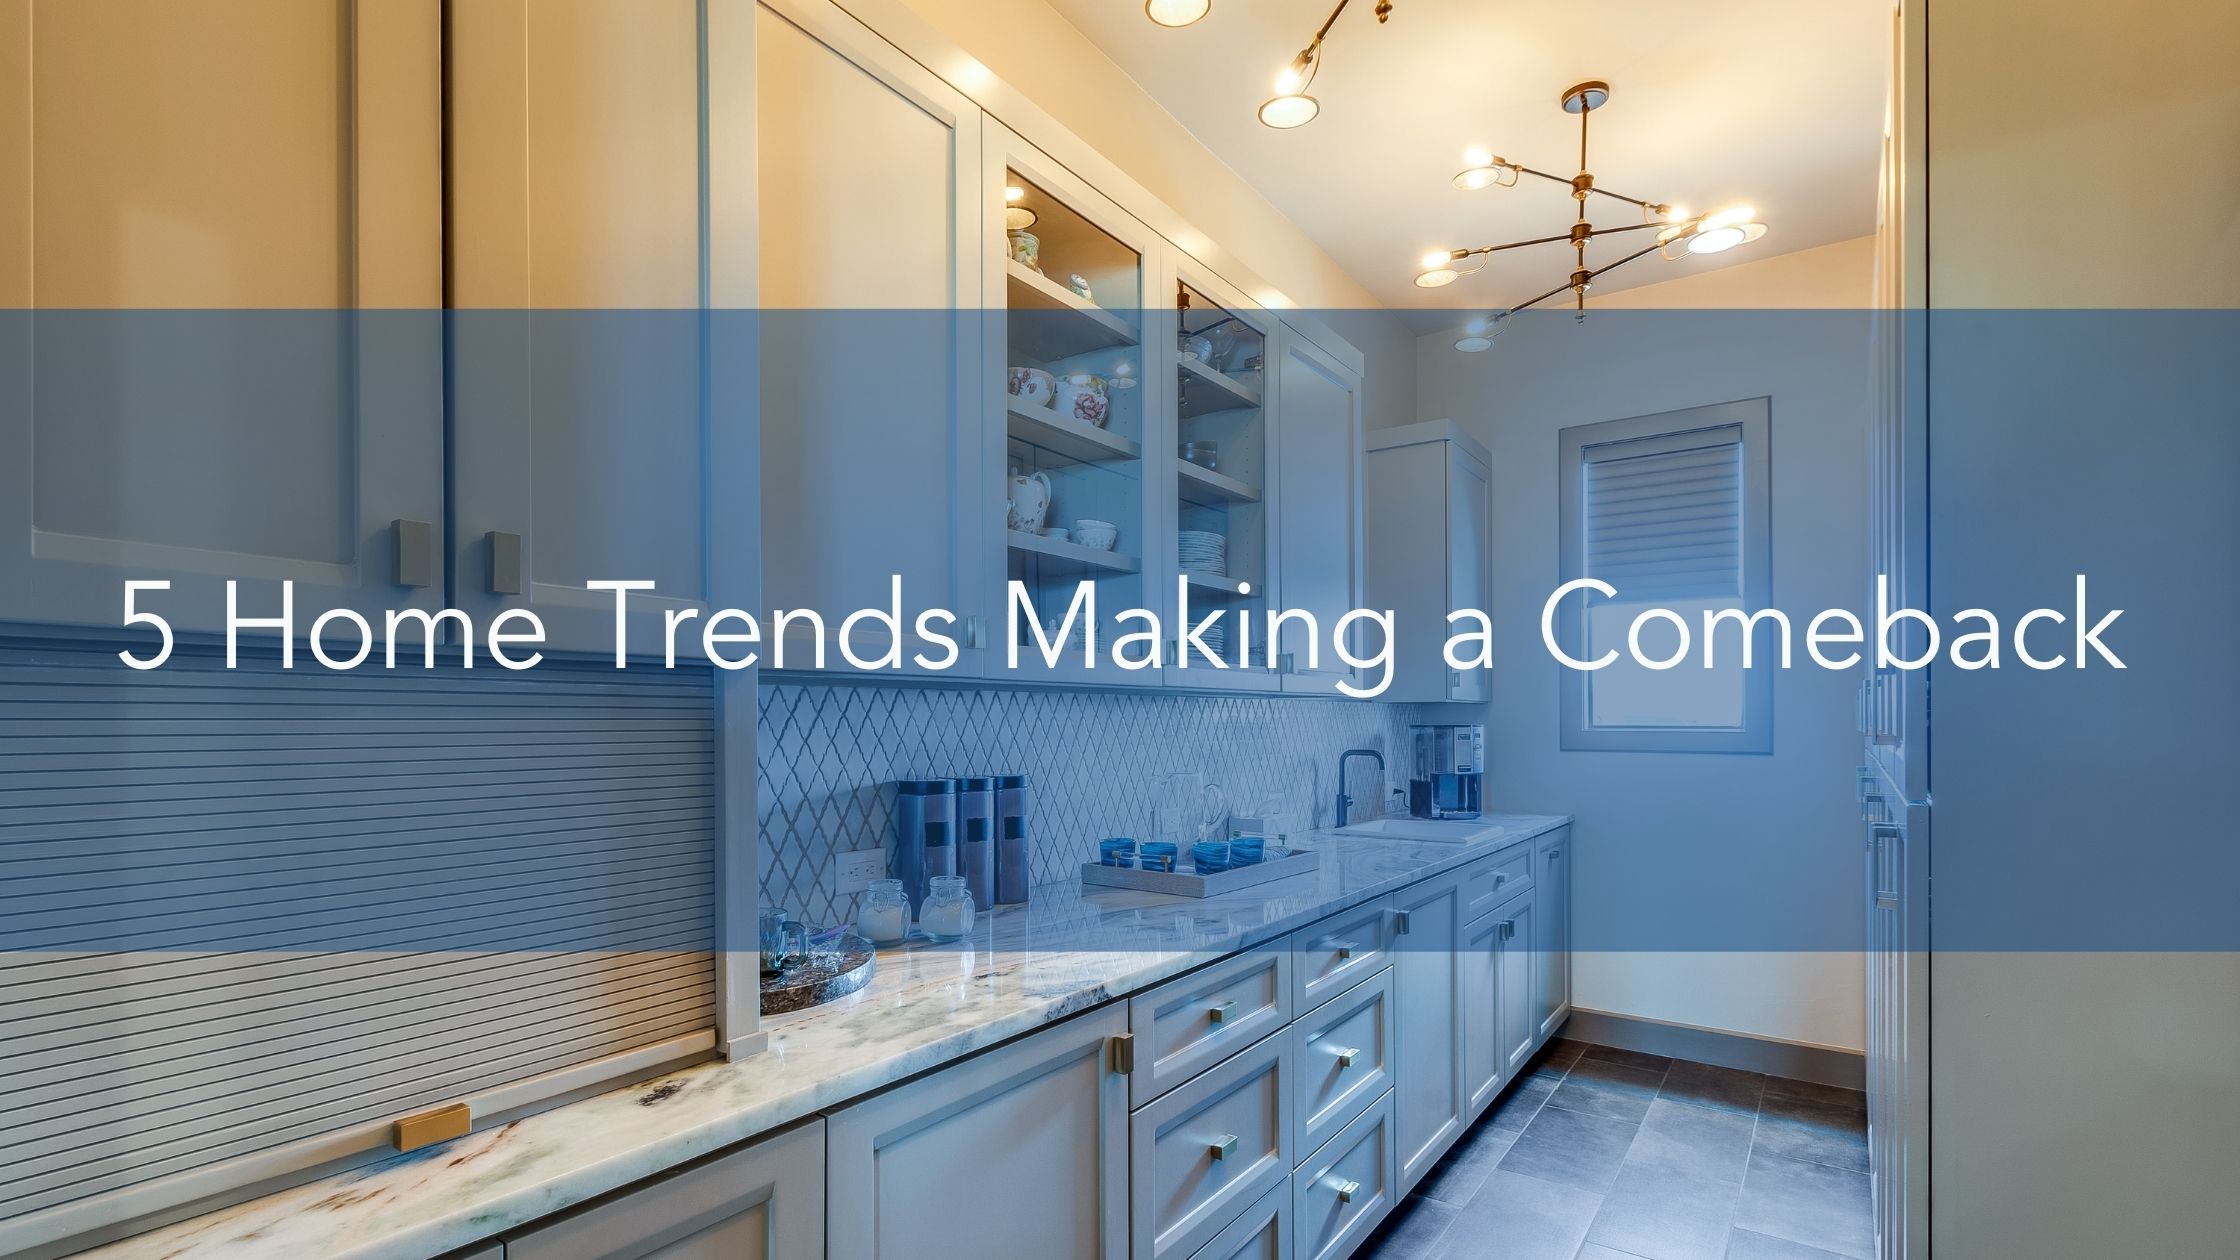 5 Home Trends Making a Comeback